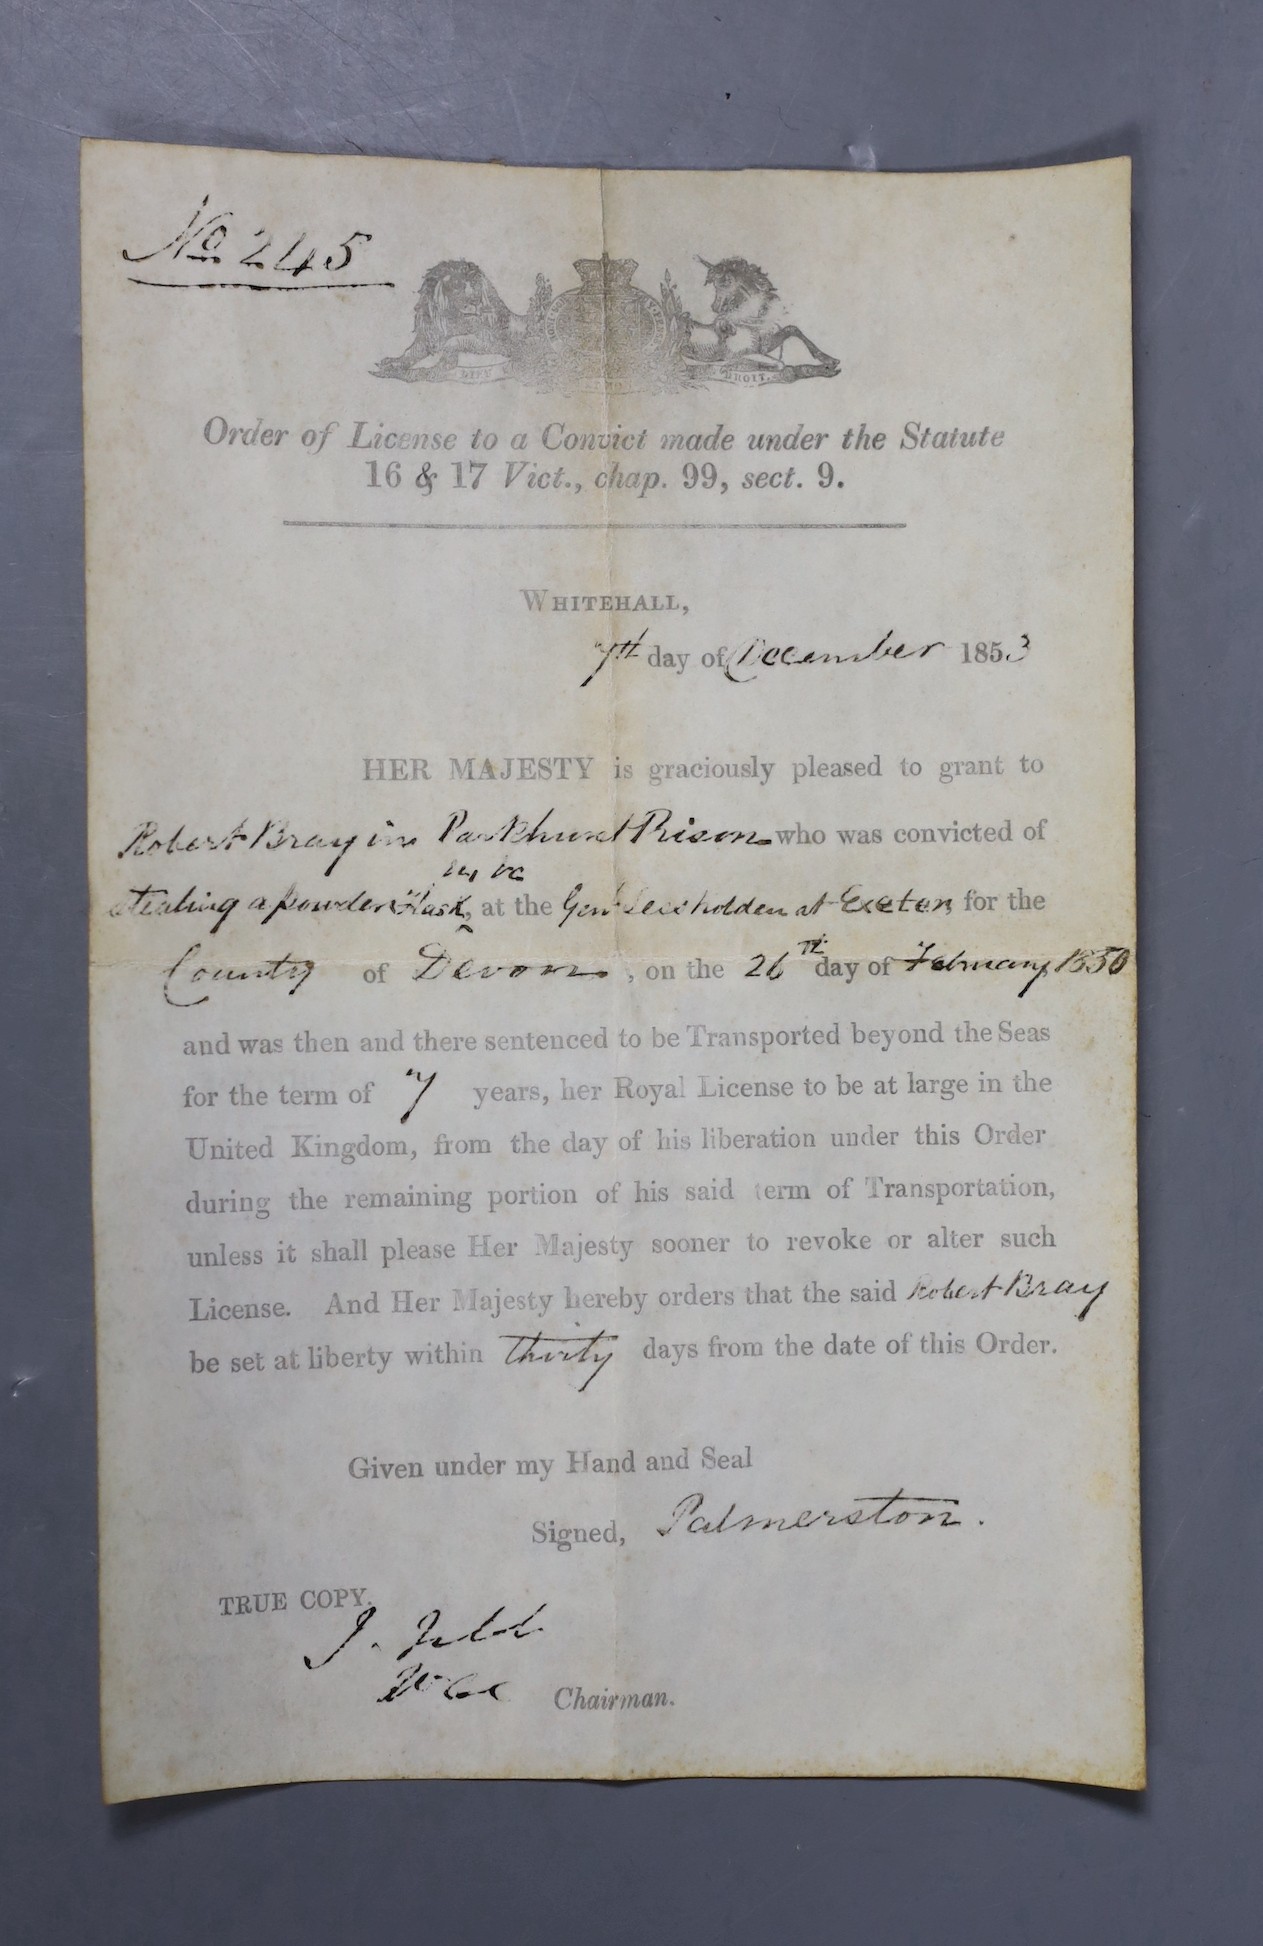 Order of License to a convict, dated 1853, signed by Palmerston